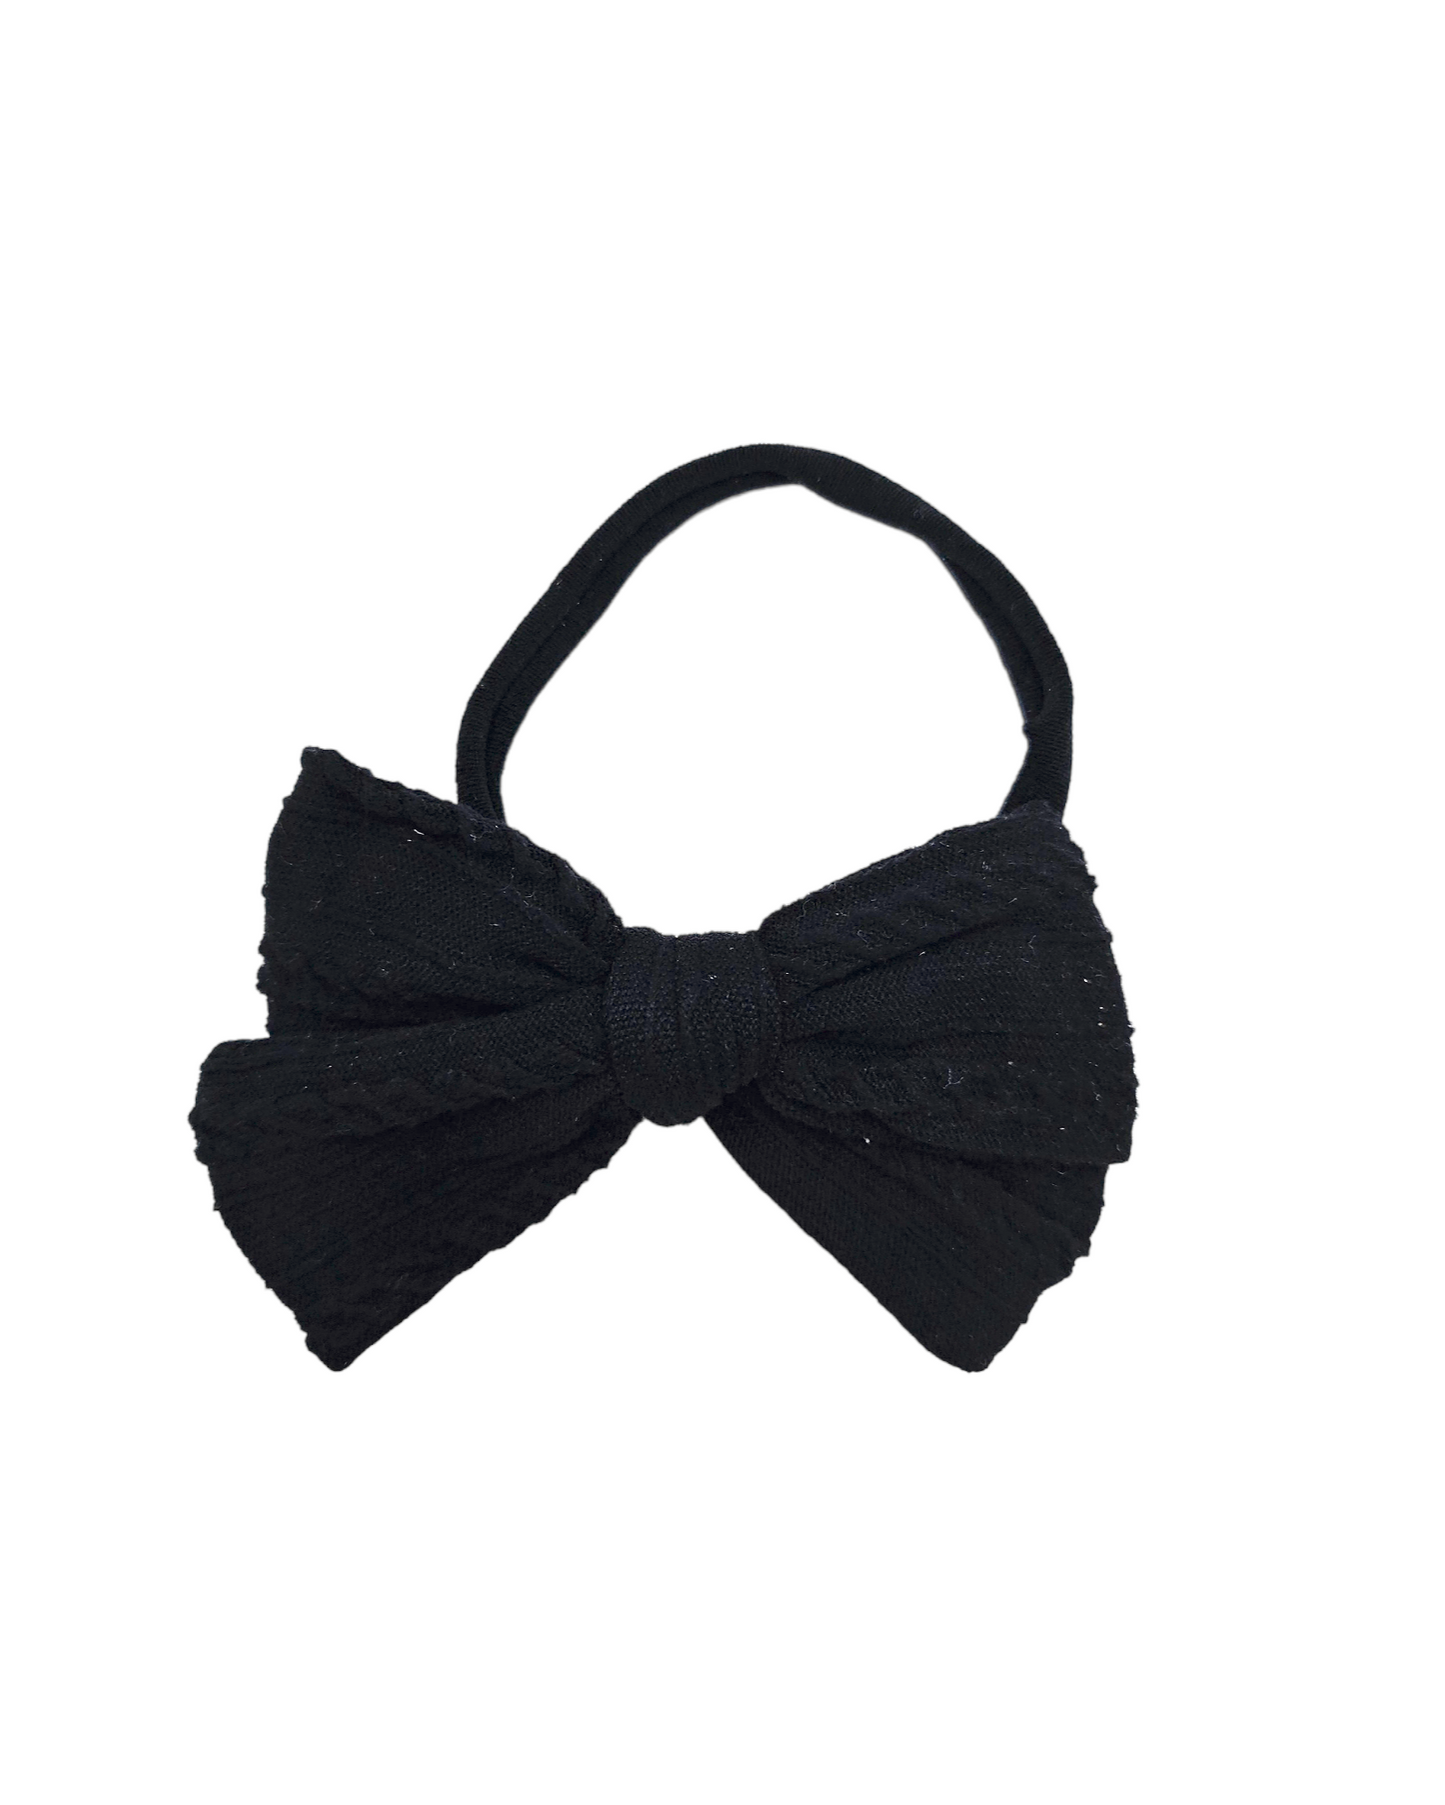 Black 3.5 Inch Cable Knit Dainty Bow Headband - Betty Brown Boutique Ltd